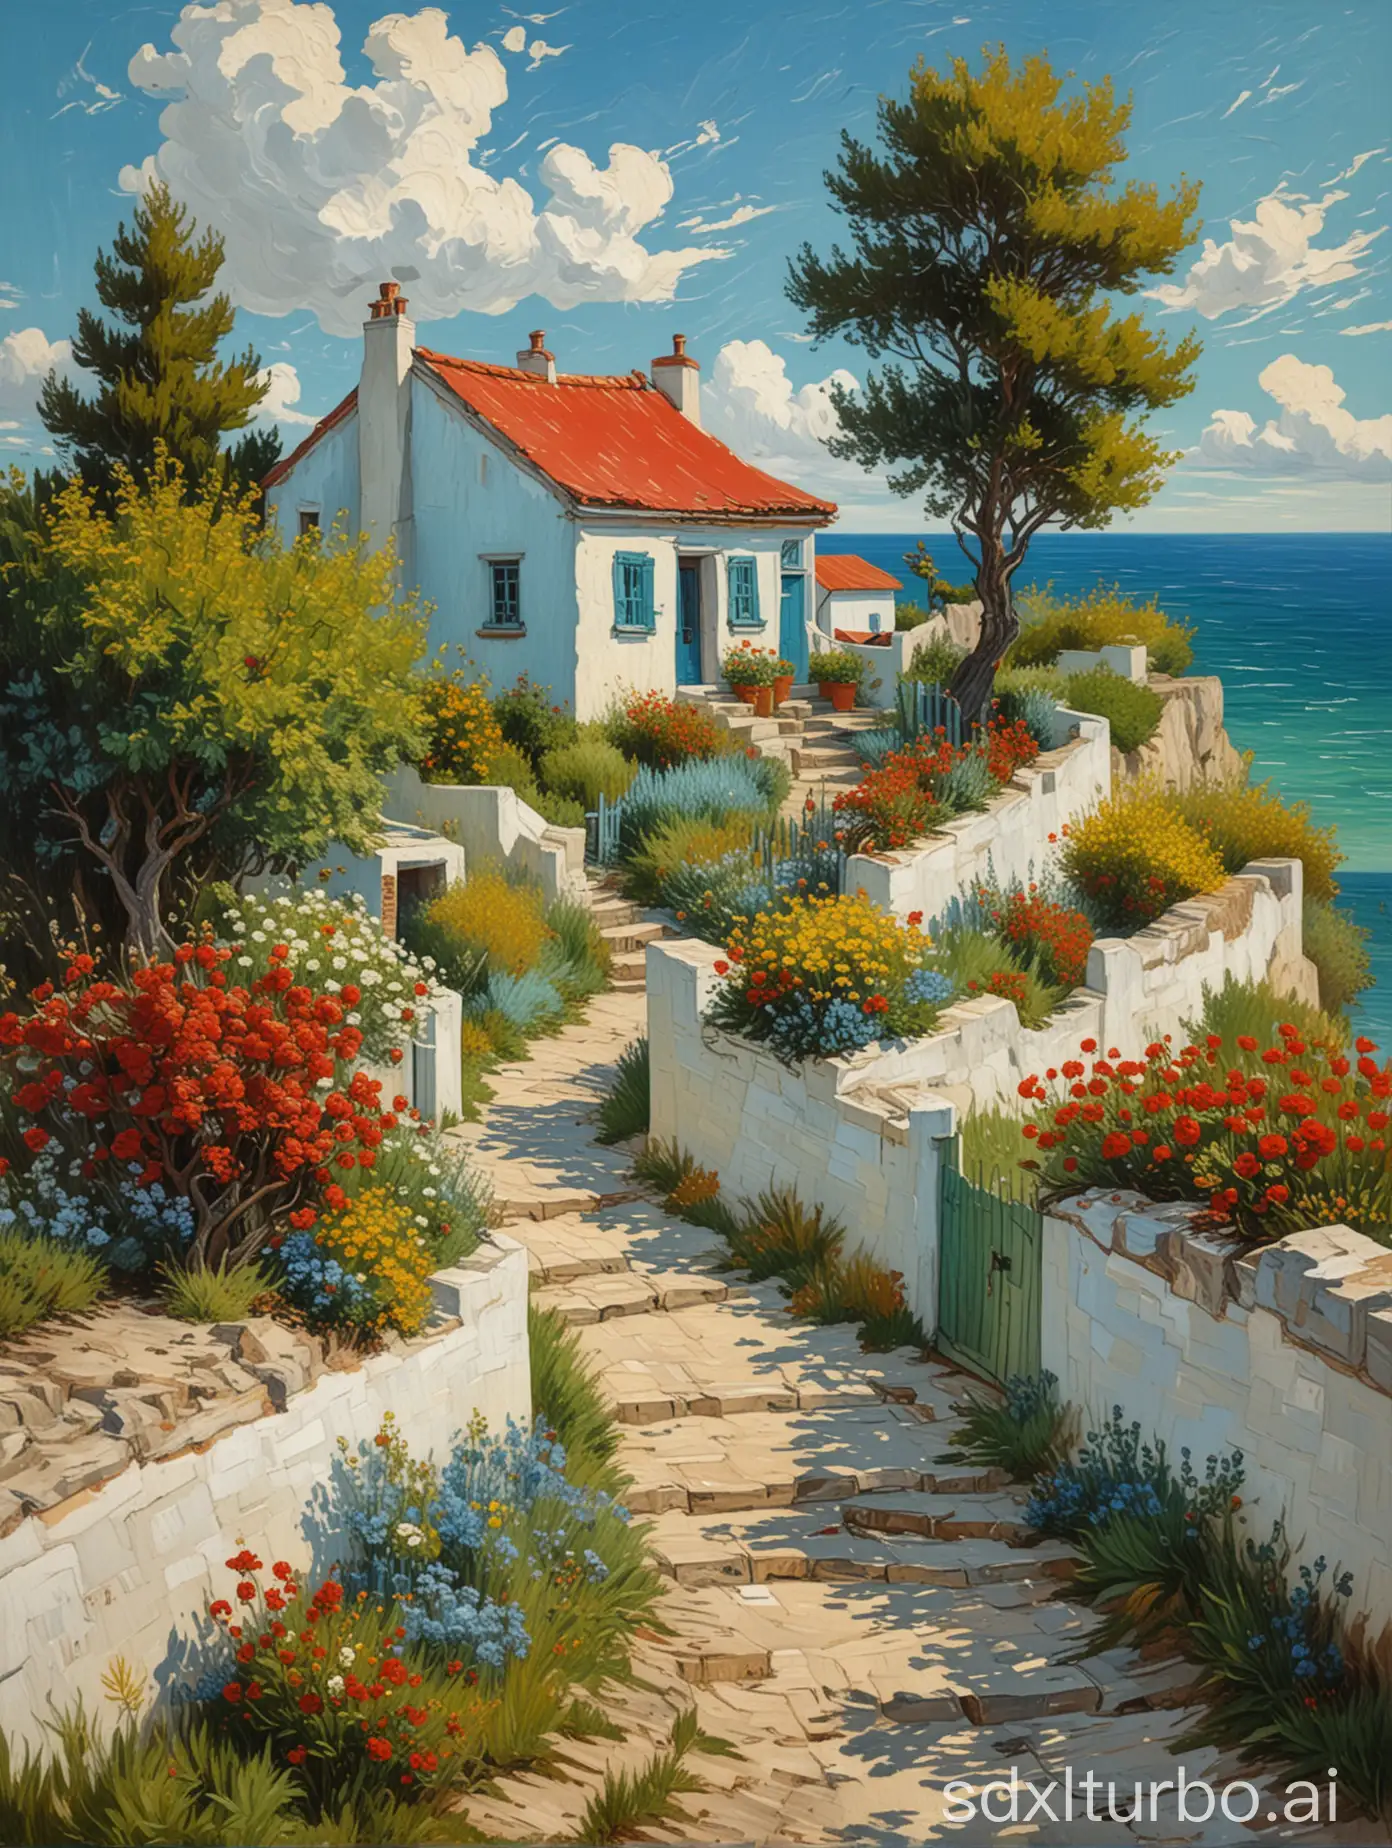 
a post impressionist oil painting, van gogh，a painting of a house on a cliff by the seaside, with a red roof and white walls, several trees next to the house, a path leading to the door full of flowers, a white cloud oil painting on the blue sky,
